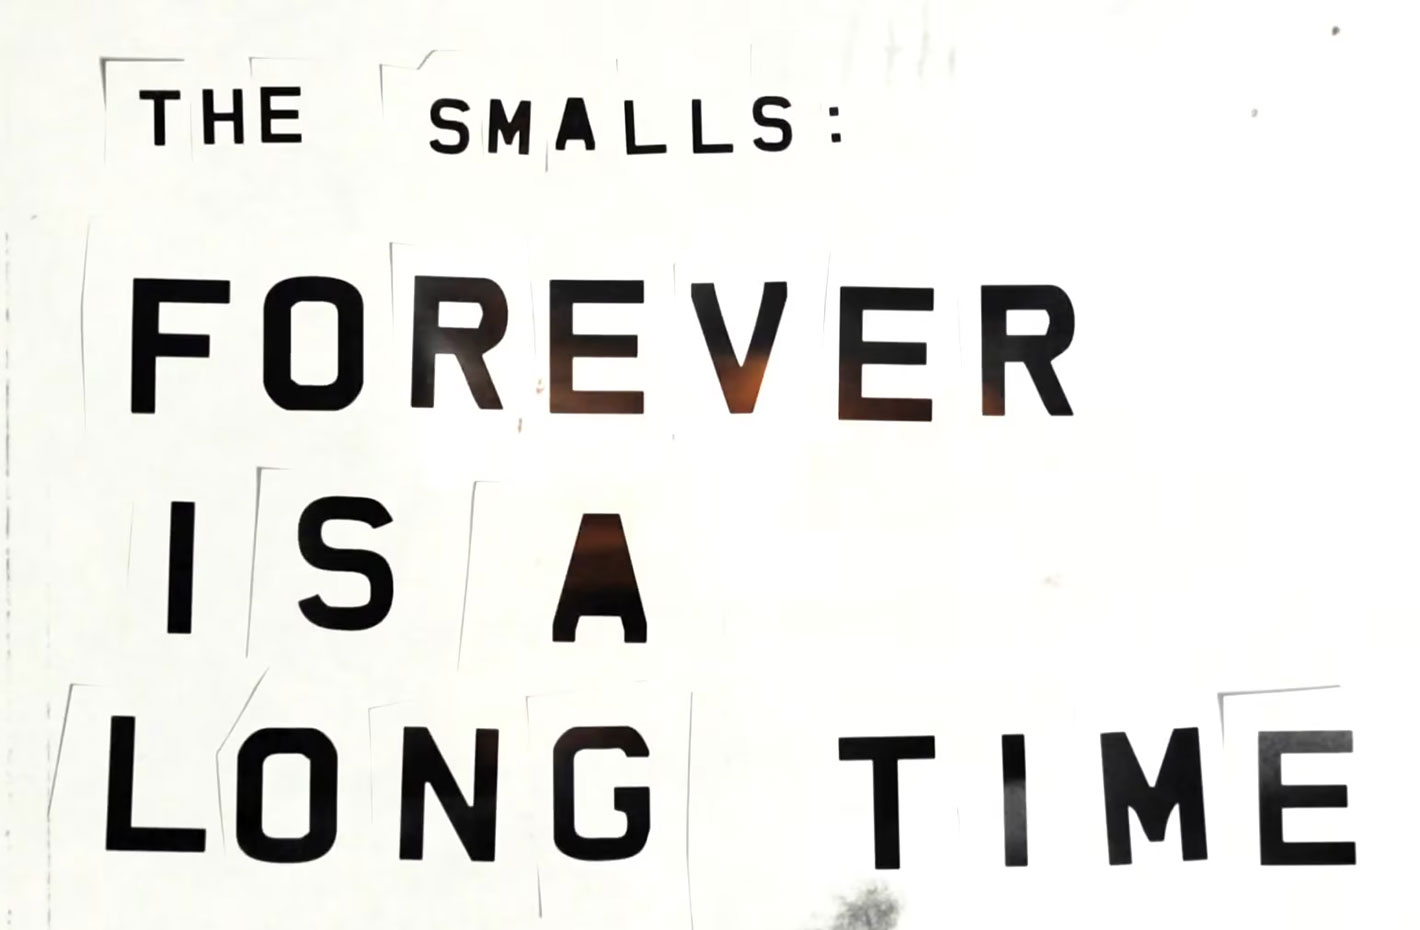 forever is a long time